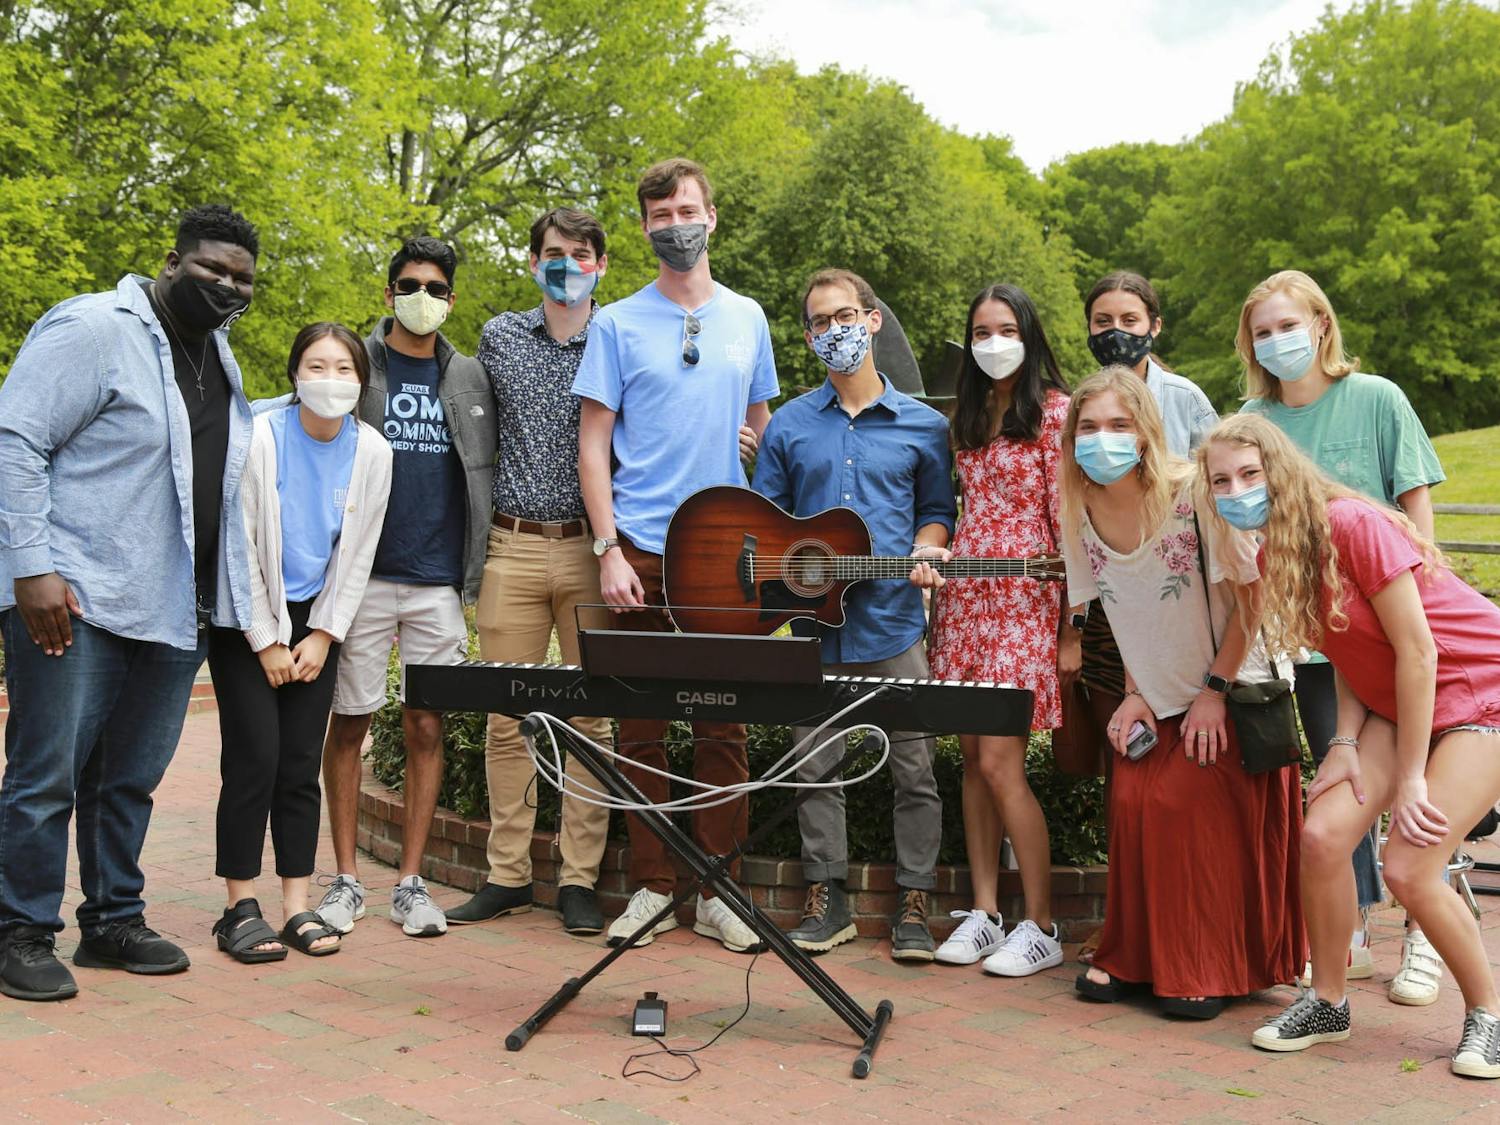 Participants of UNC Musical Empowerment's outdoor senior recital pictured last year in the Gene Stroud Community Rose Garden. Photo by Alex Berenfeld.